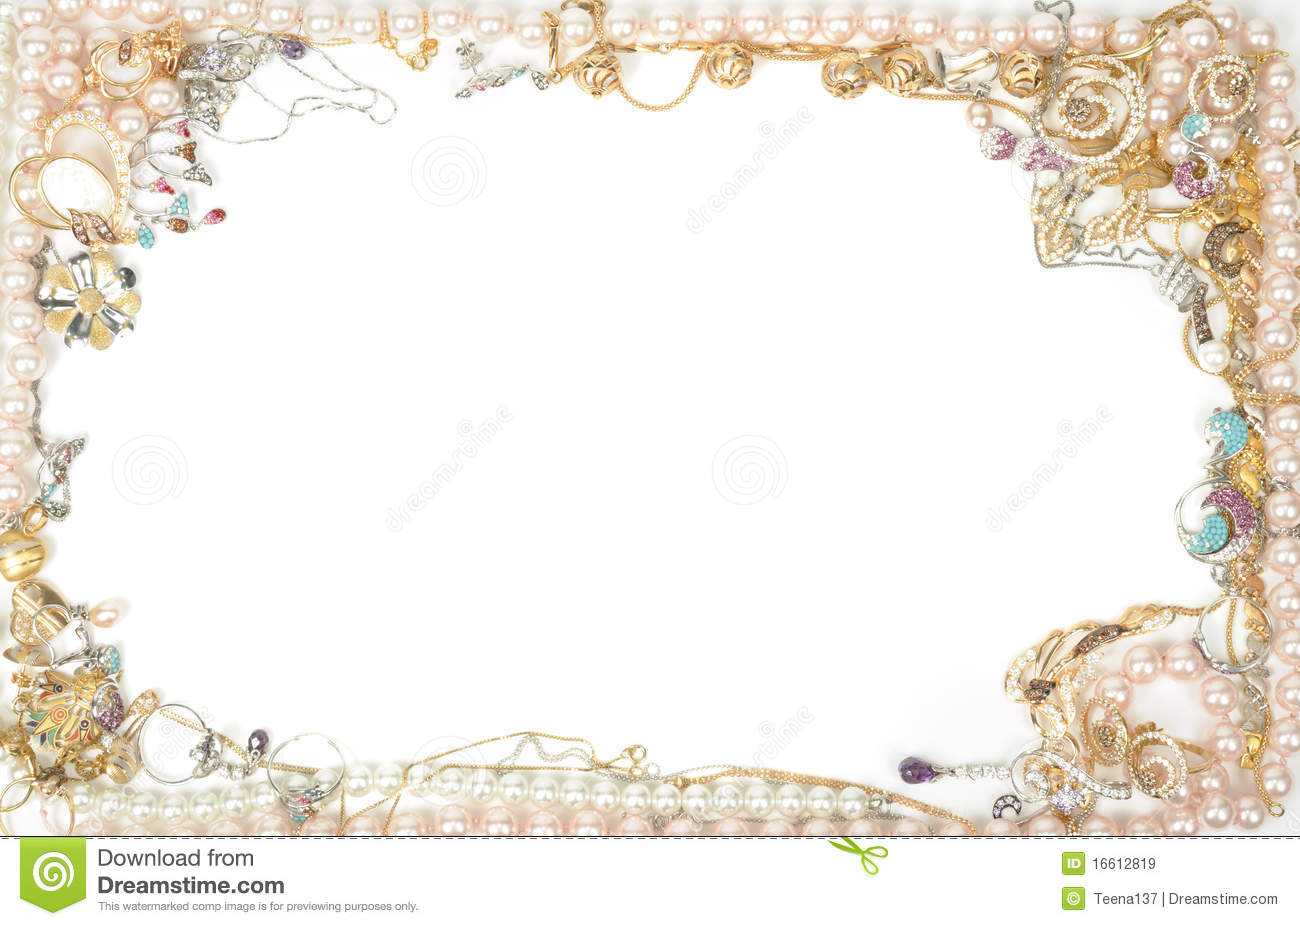 Jewelry Border Royalty Free Stock Images   Image  16612819